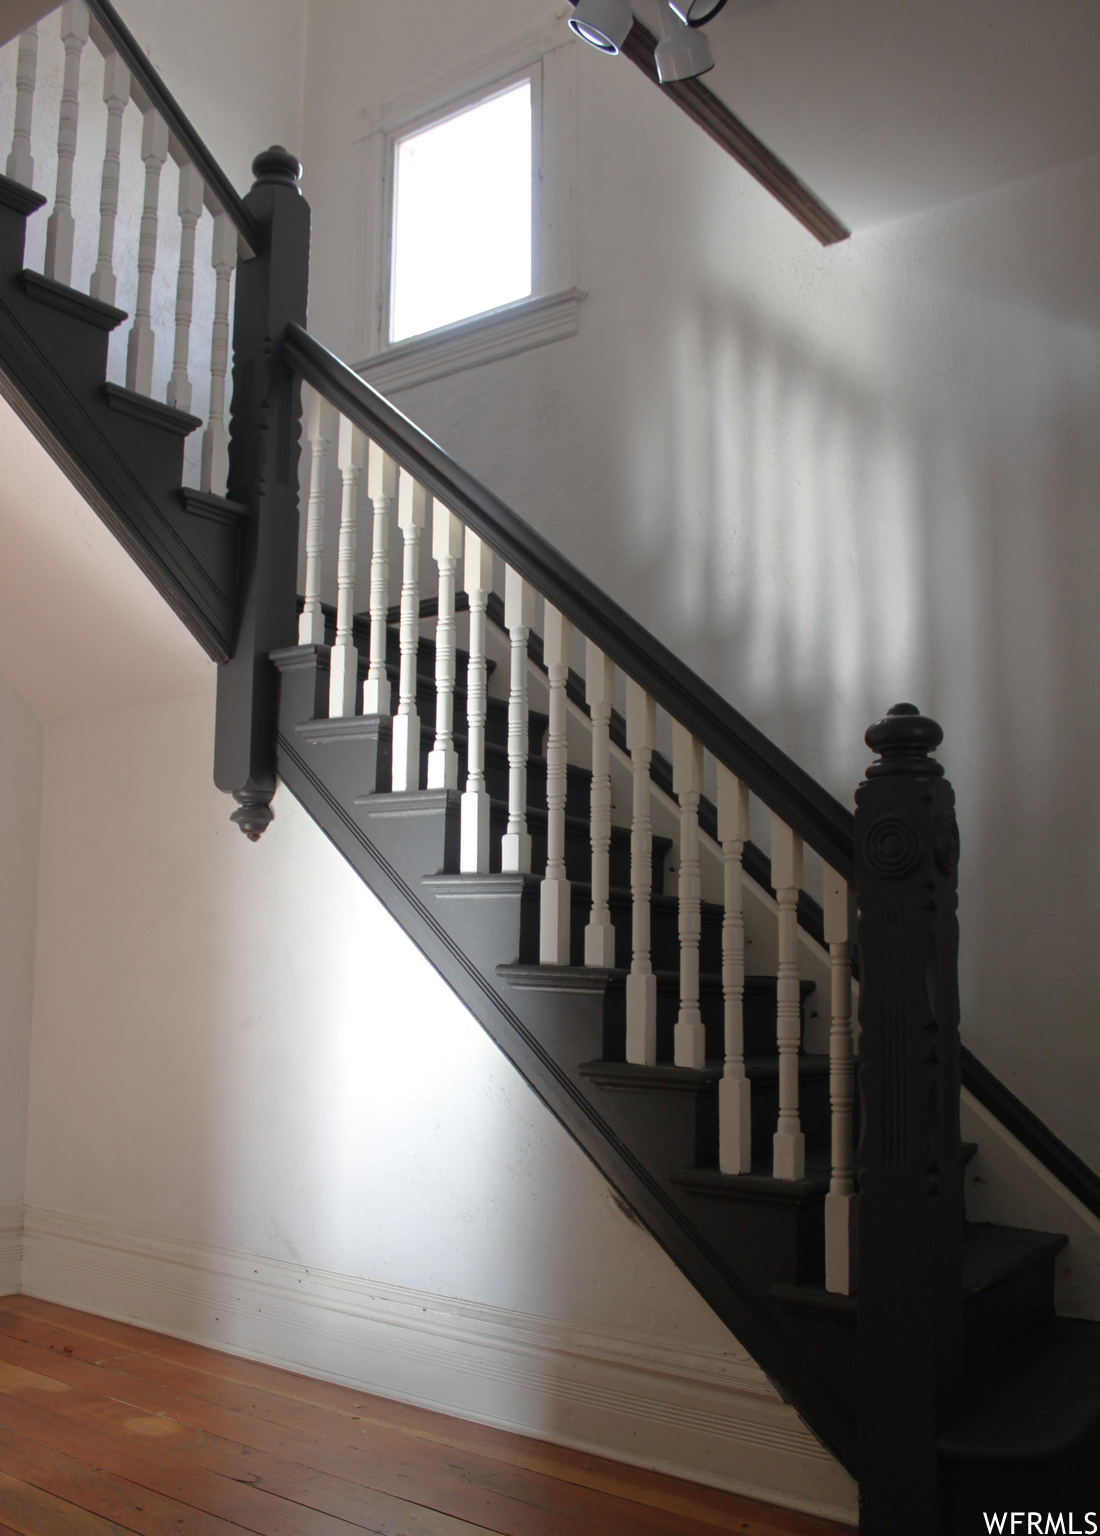 Original Victorian staircase with original newels, handrails, and balusters.